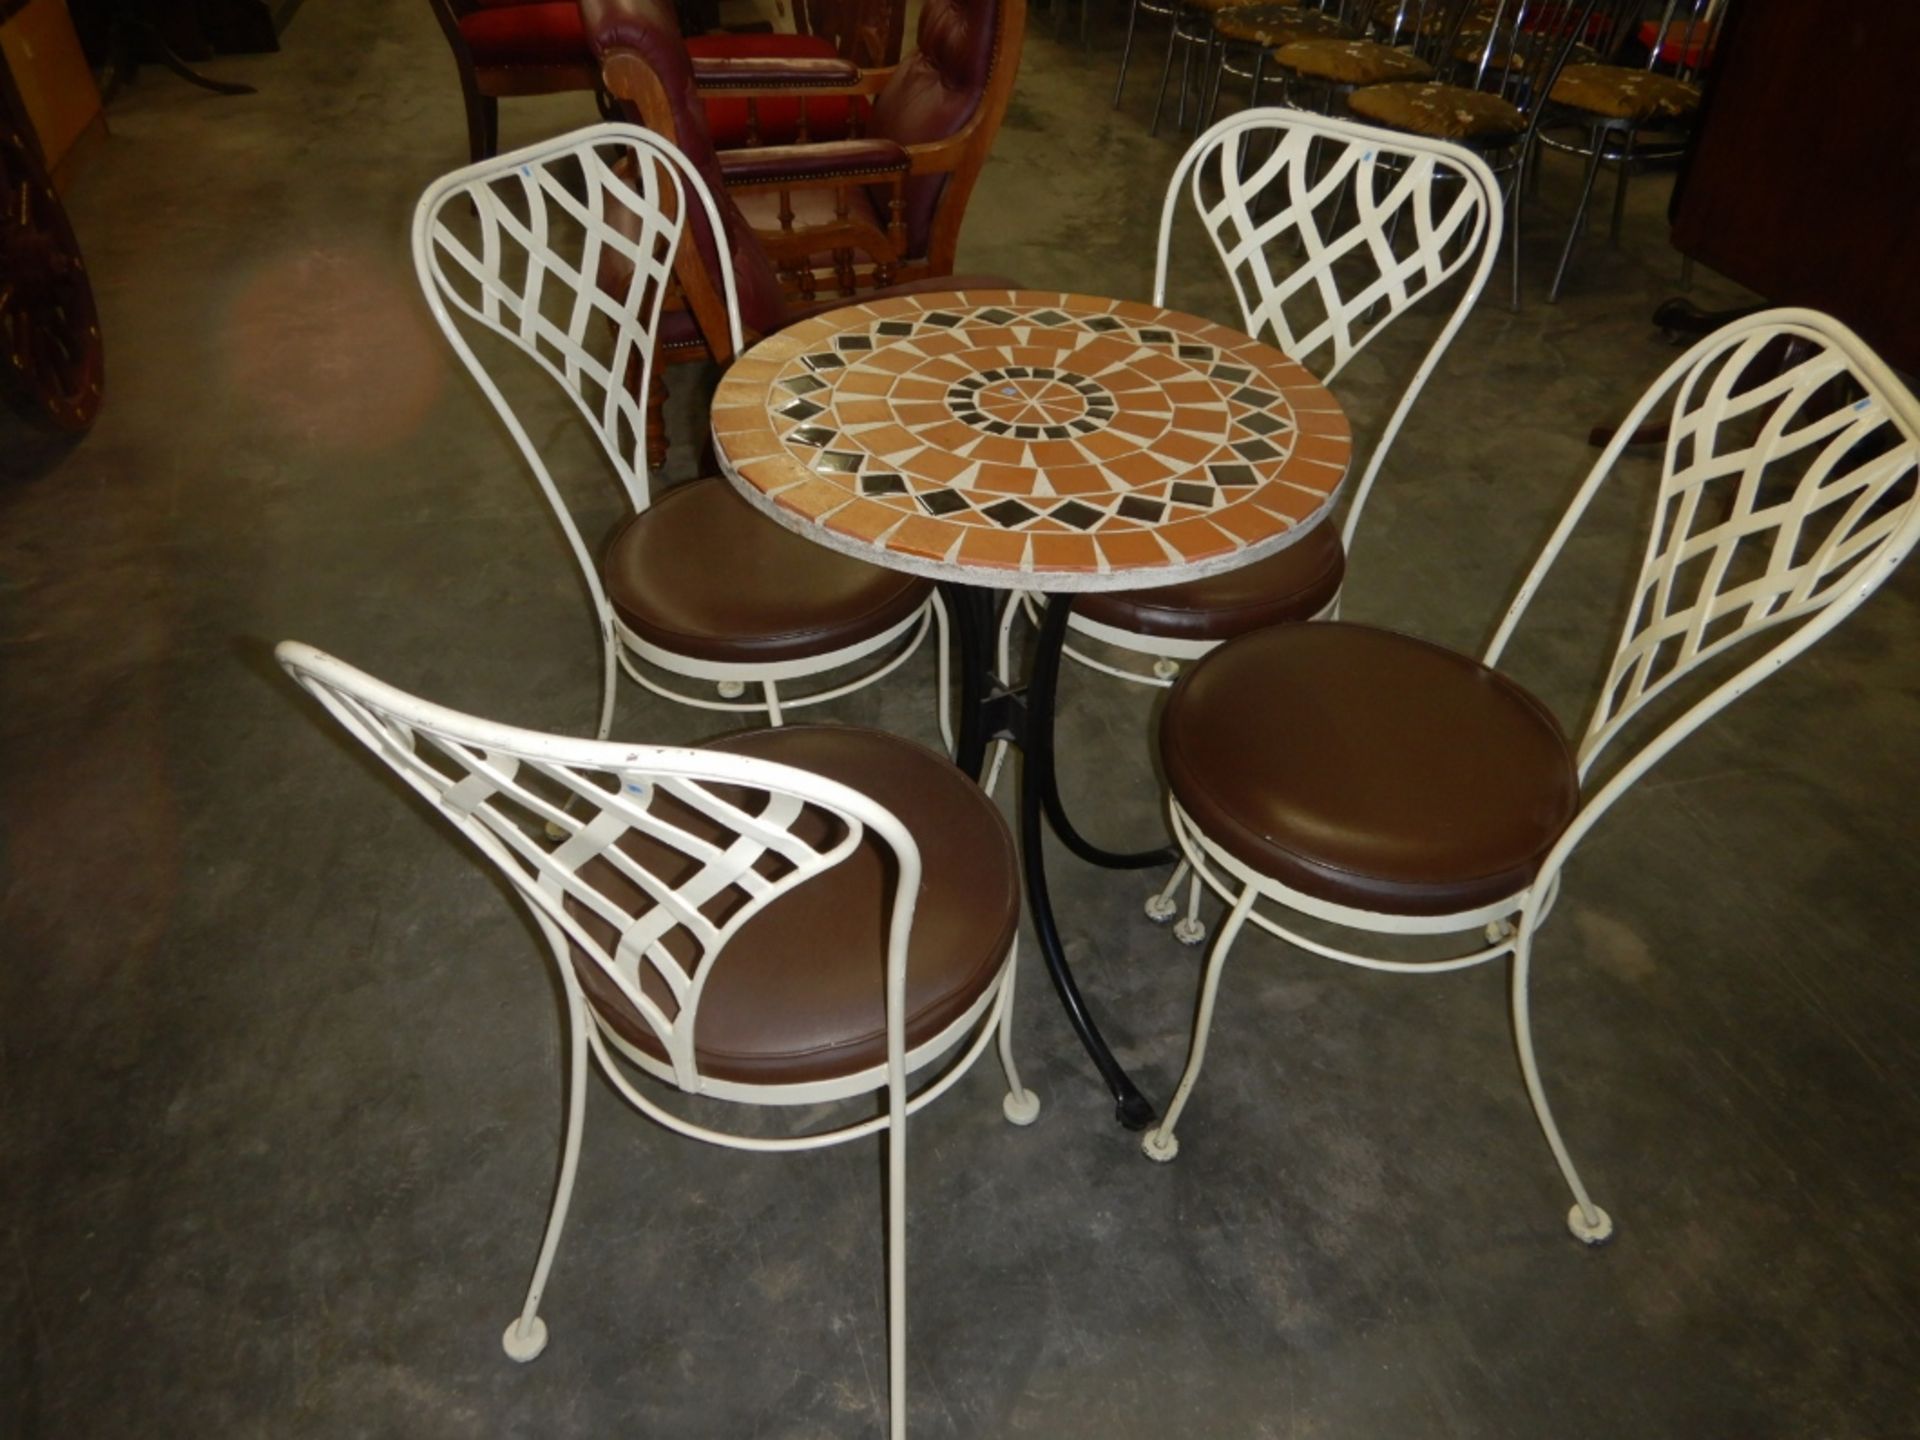 ANTIQUE STONE BISTRO TABLE & CHAIRS (4) - CHOCOLATE PADDED VINYL SEAT - Image 3 of 7